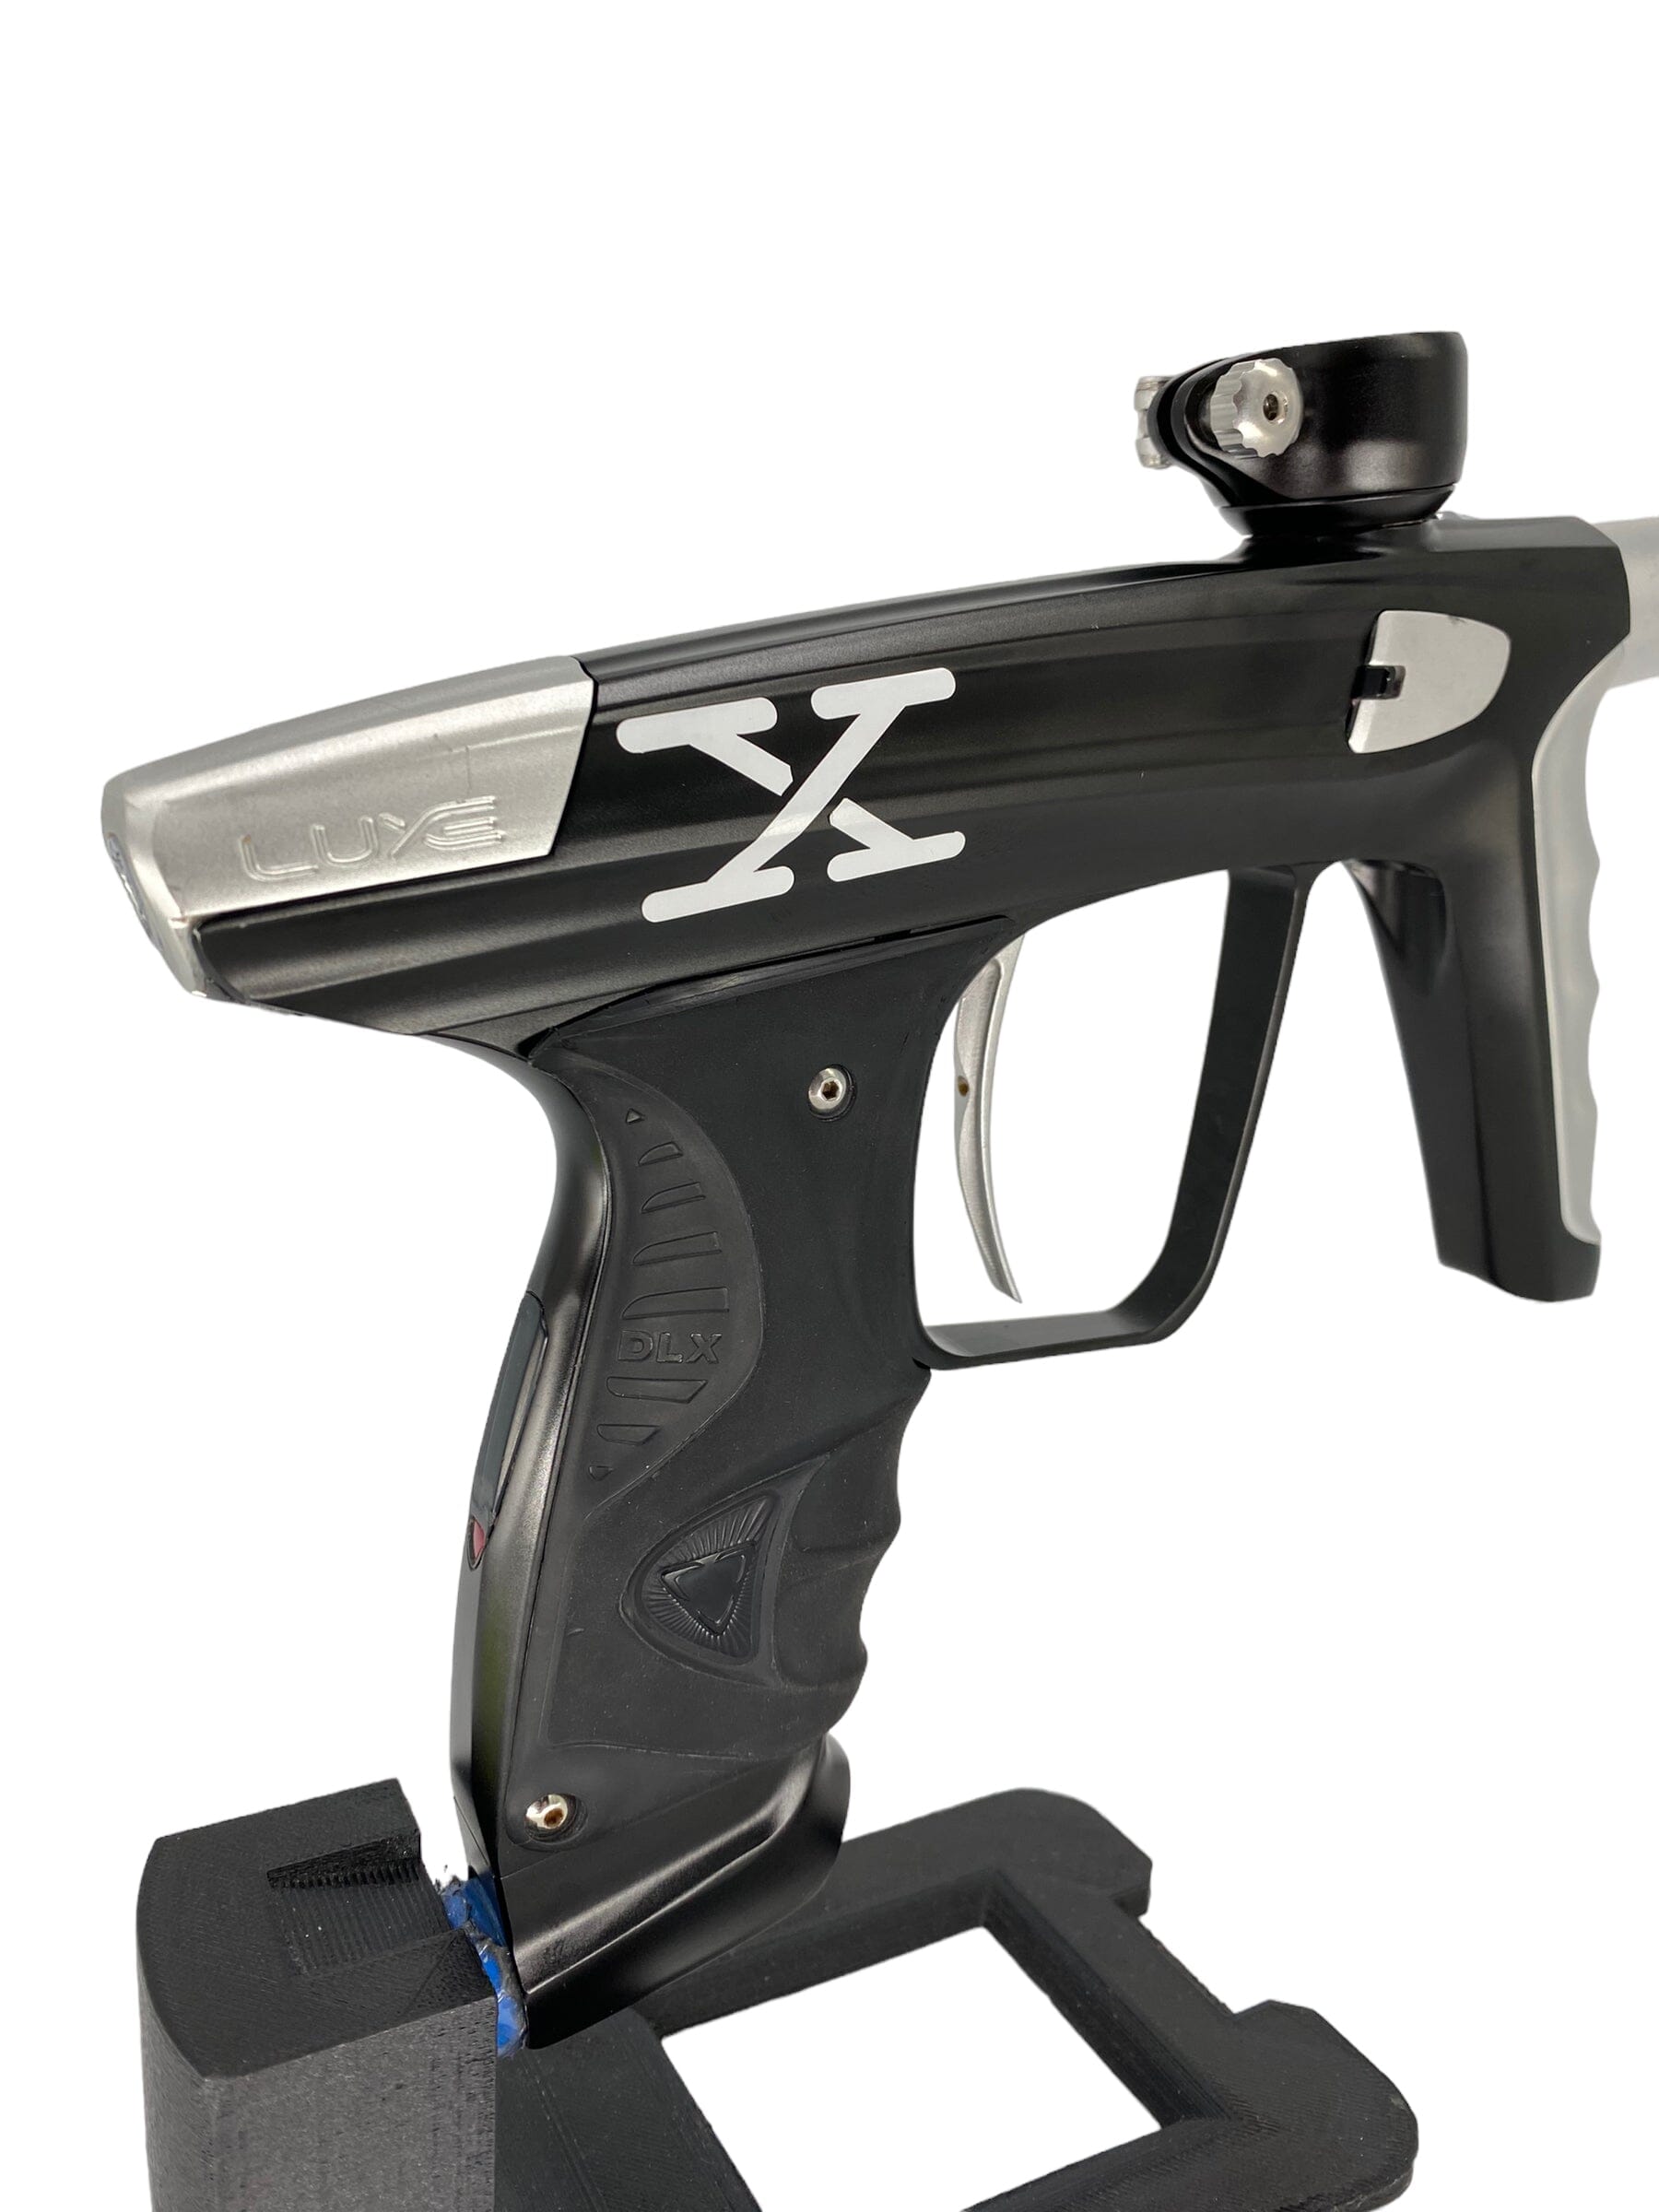 Used Dlx Luxe X Paintball Gun from CPXBrosPaintball Buy/Sell/Trade Paintball Markers, Paintball Hoppers, Paintball Masks, and Hormesis Headbands